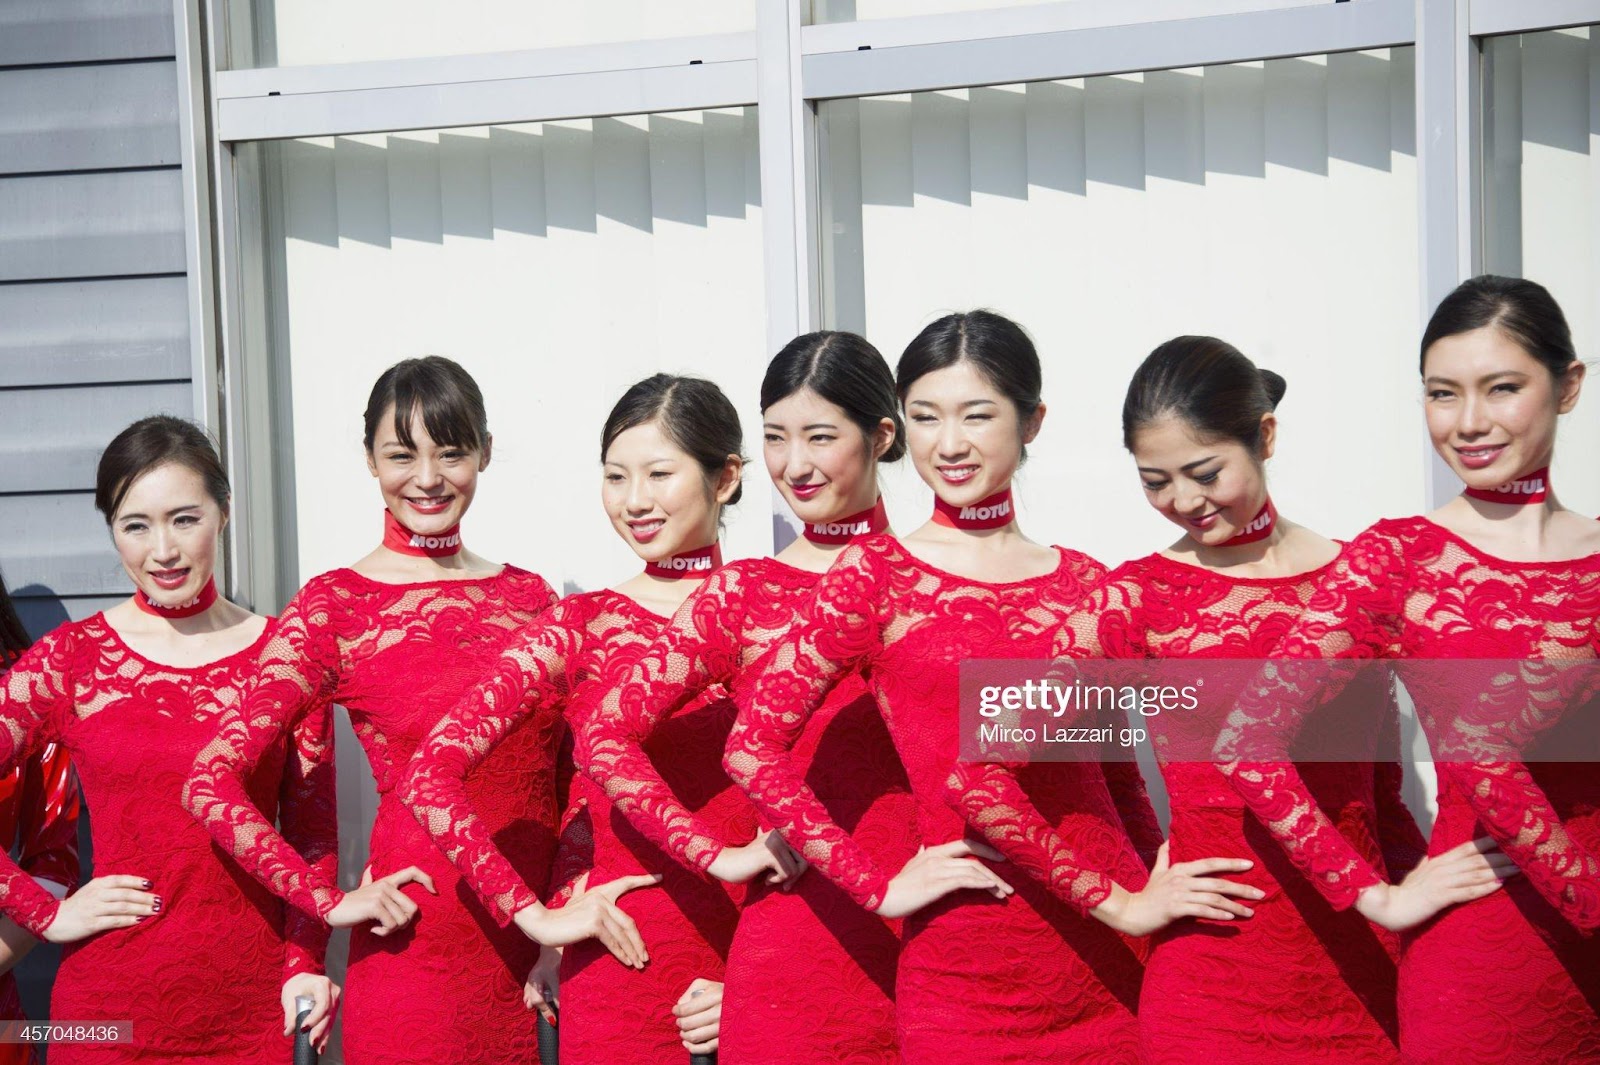 D:\Documenti\posts\posts\Women and motorsport\foto\Getty e altre\the-grid-girls-pose-in-paddock-during-the-motogp-of-japan-qualifying-picture-id457048436.jpg